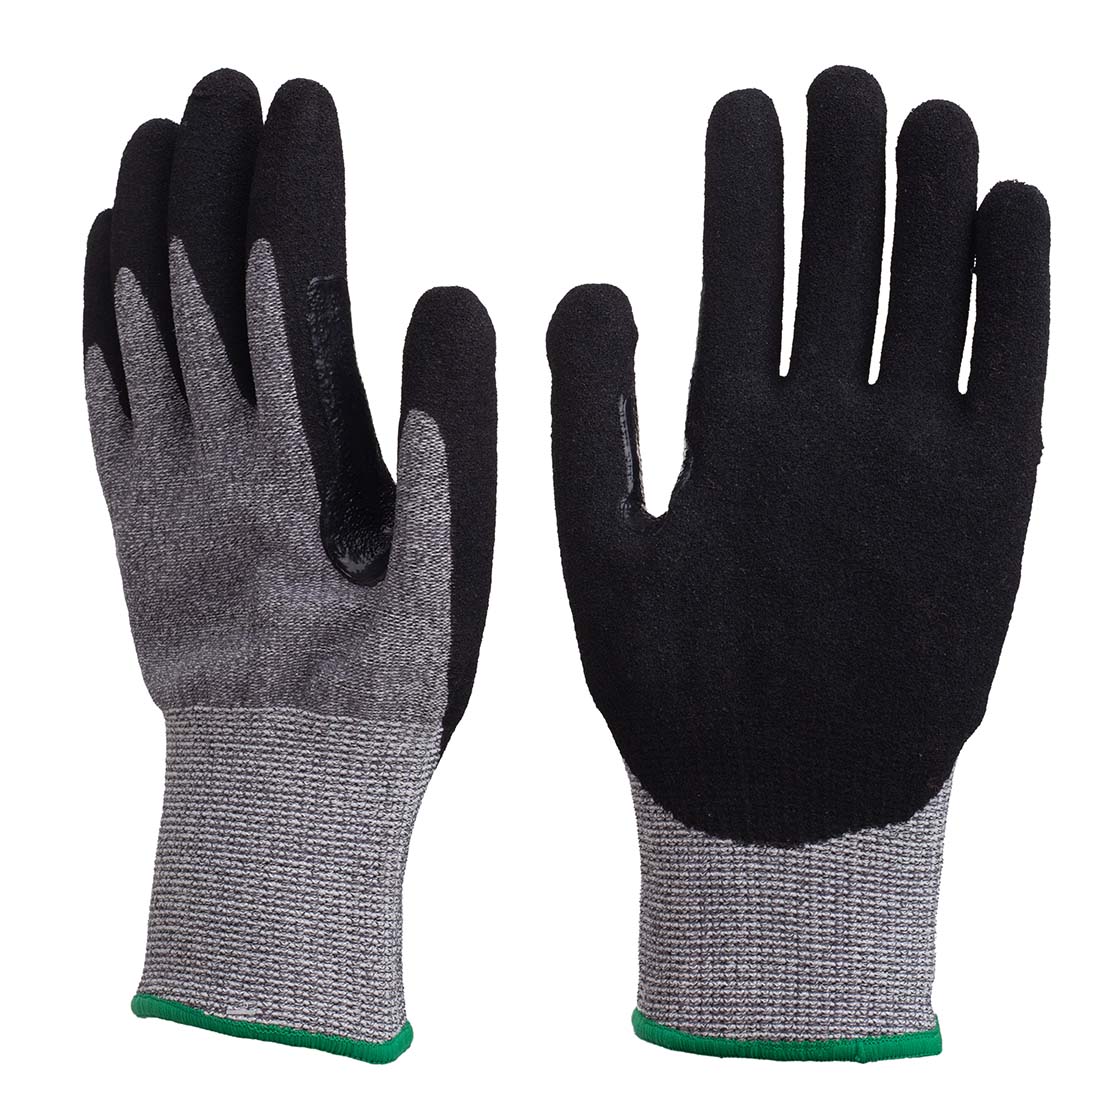 13G A4 cut resistant glove sandy nitrile palm coated, reinforced thumb saddle